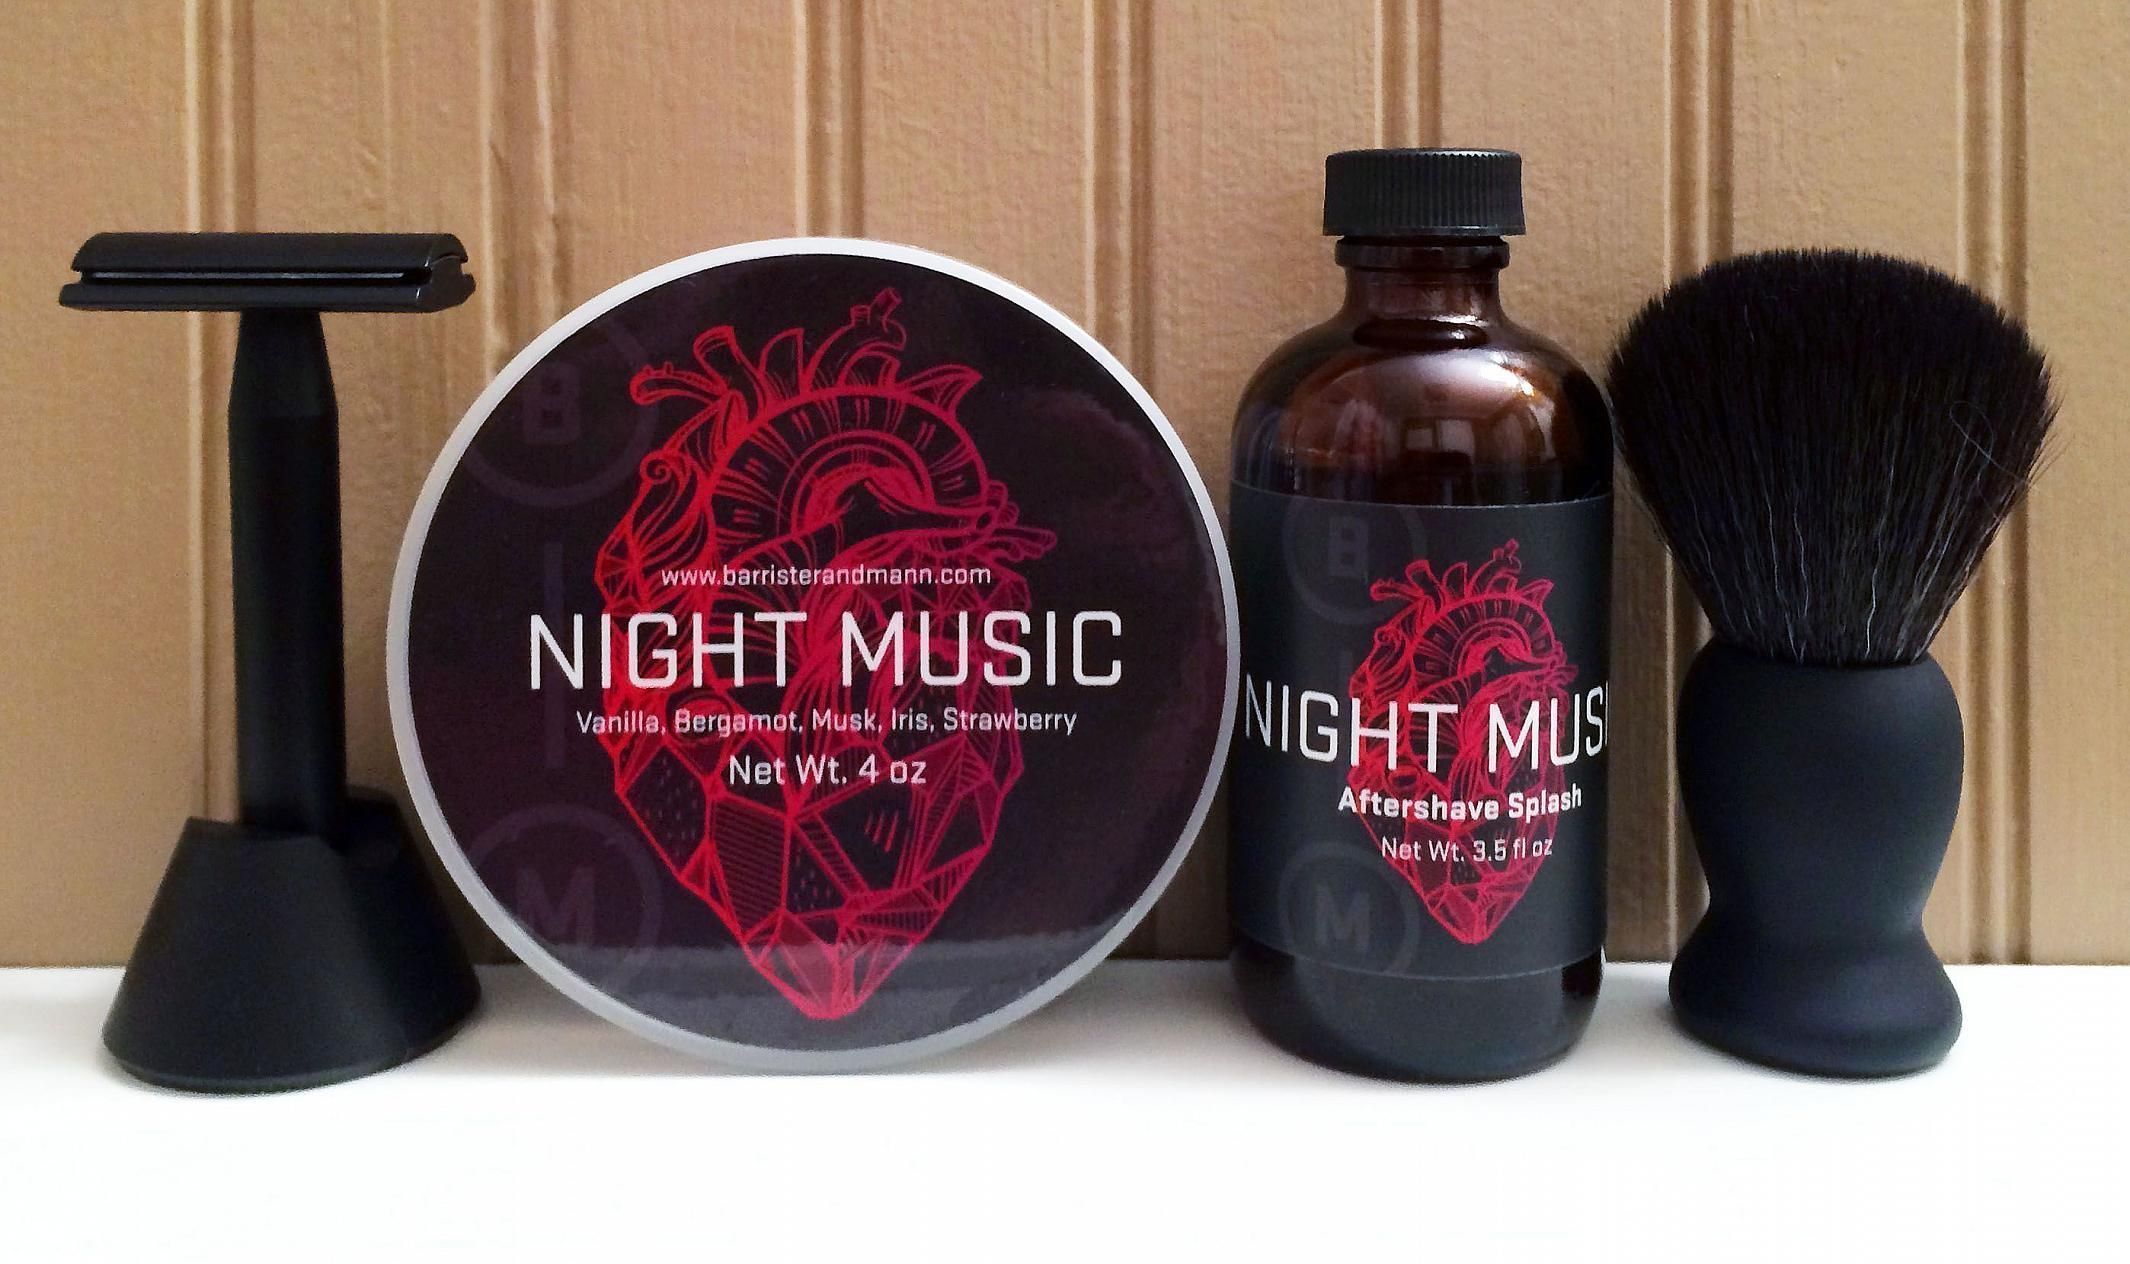 Barrister and Mann "Night Music"